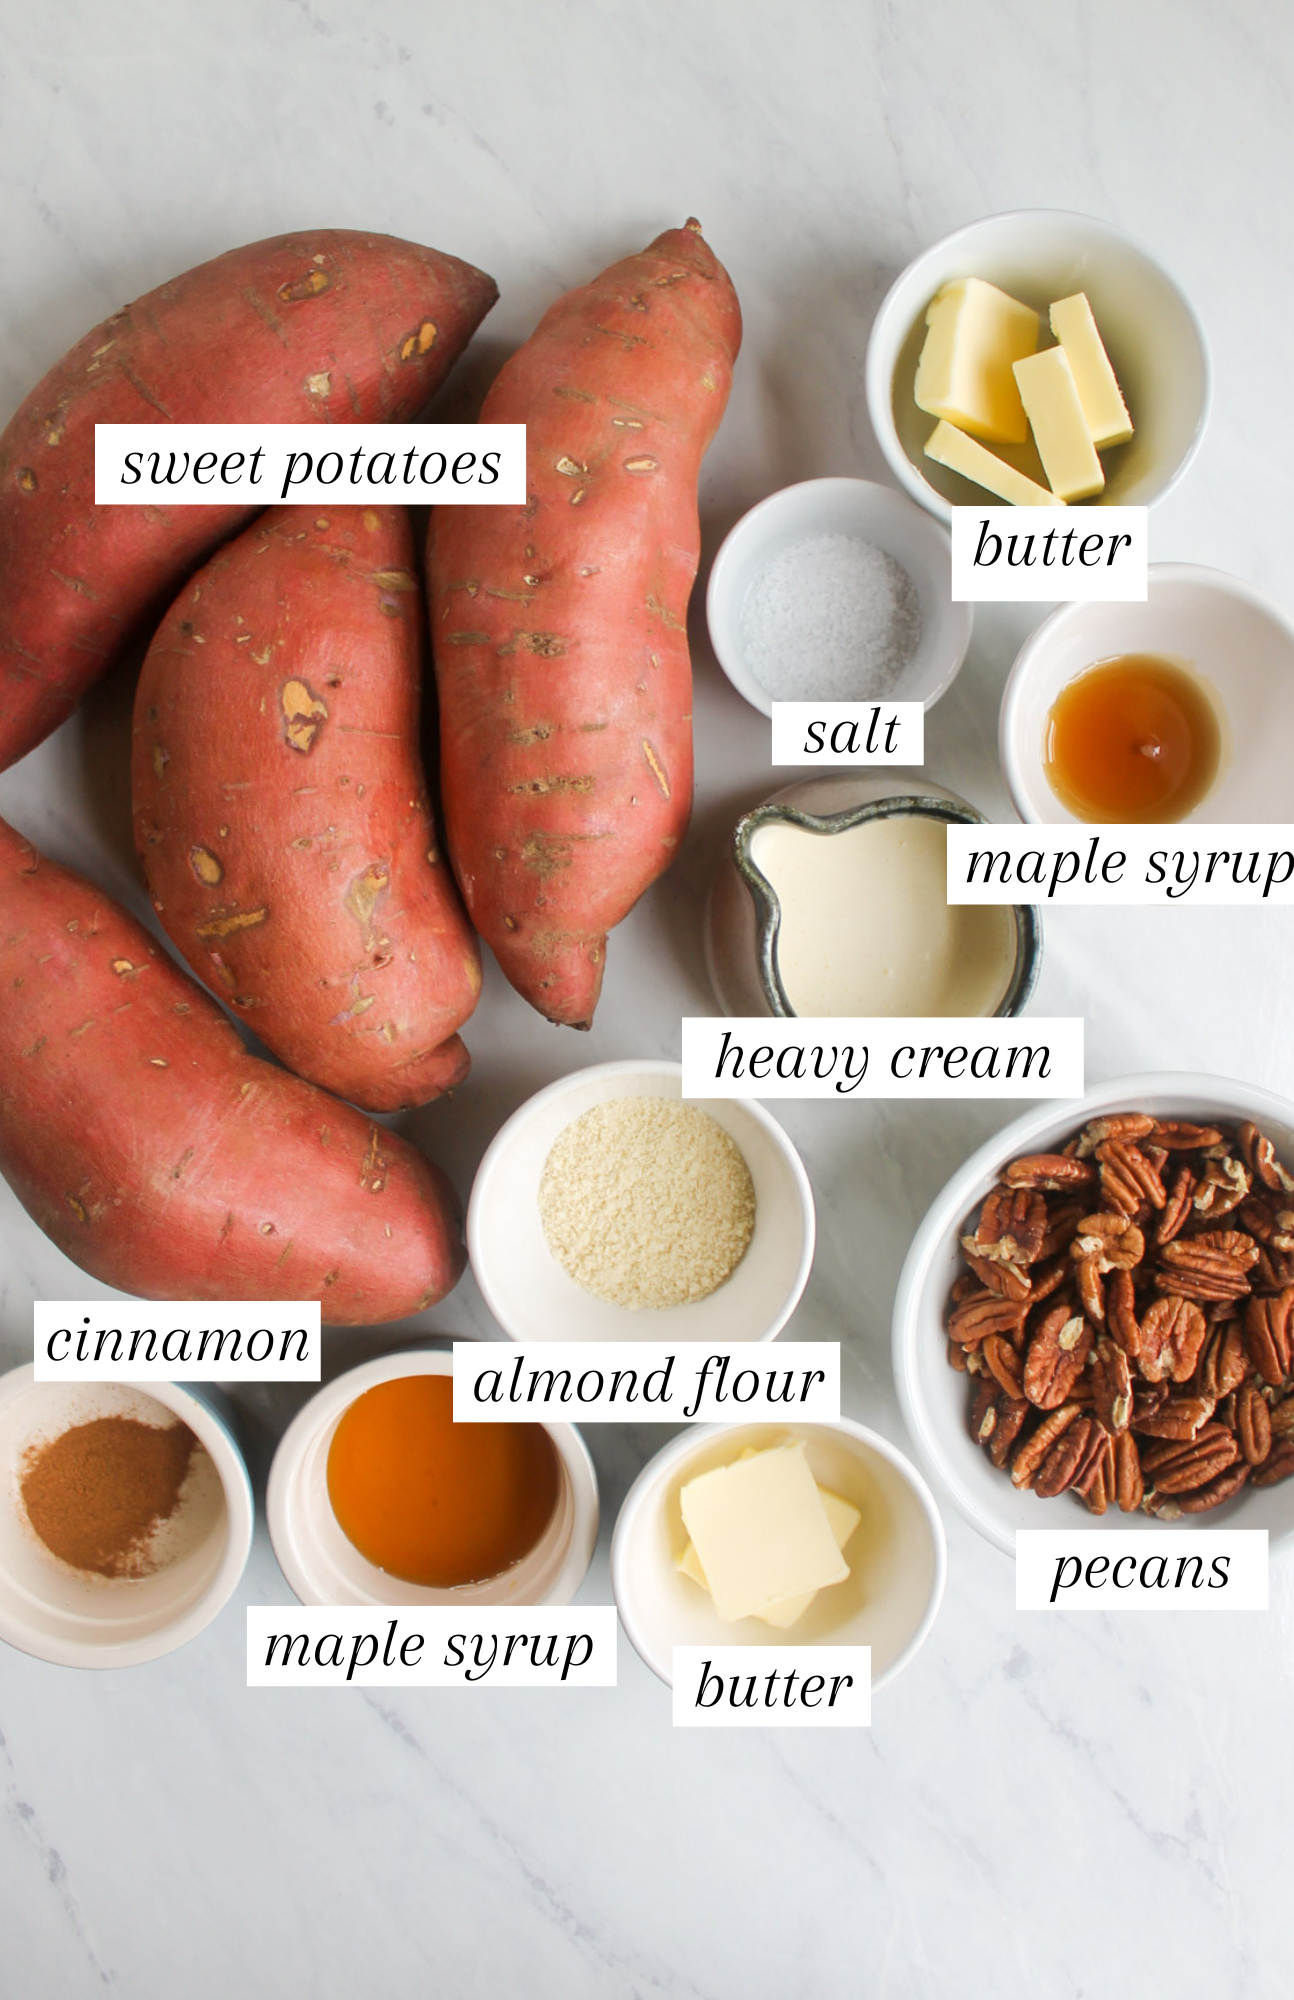 Labeled ingredients for Sweet Potato Casserole.